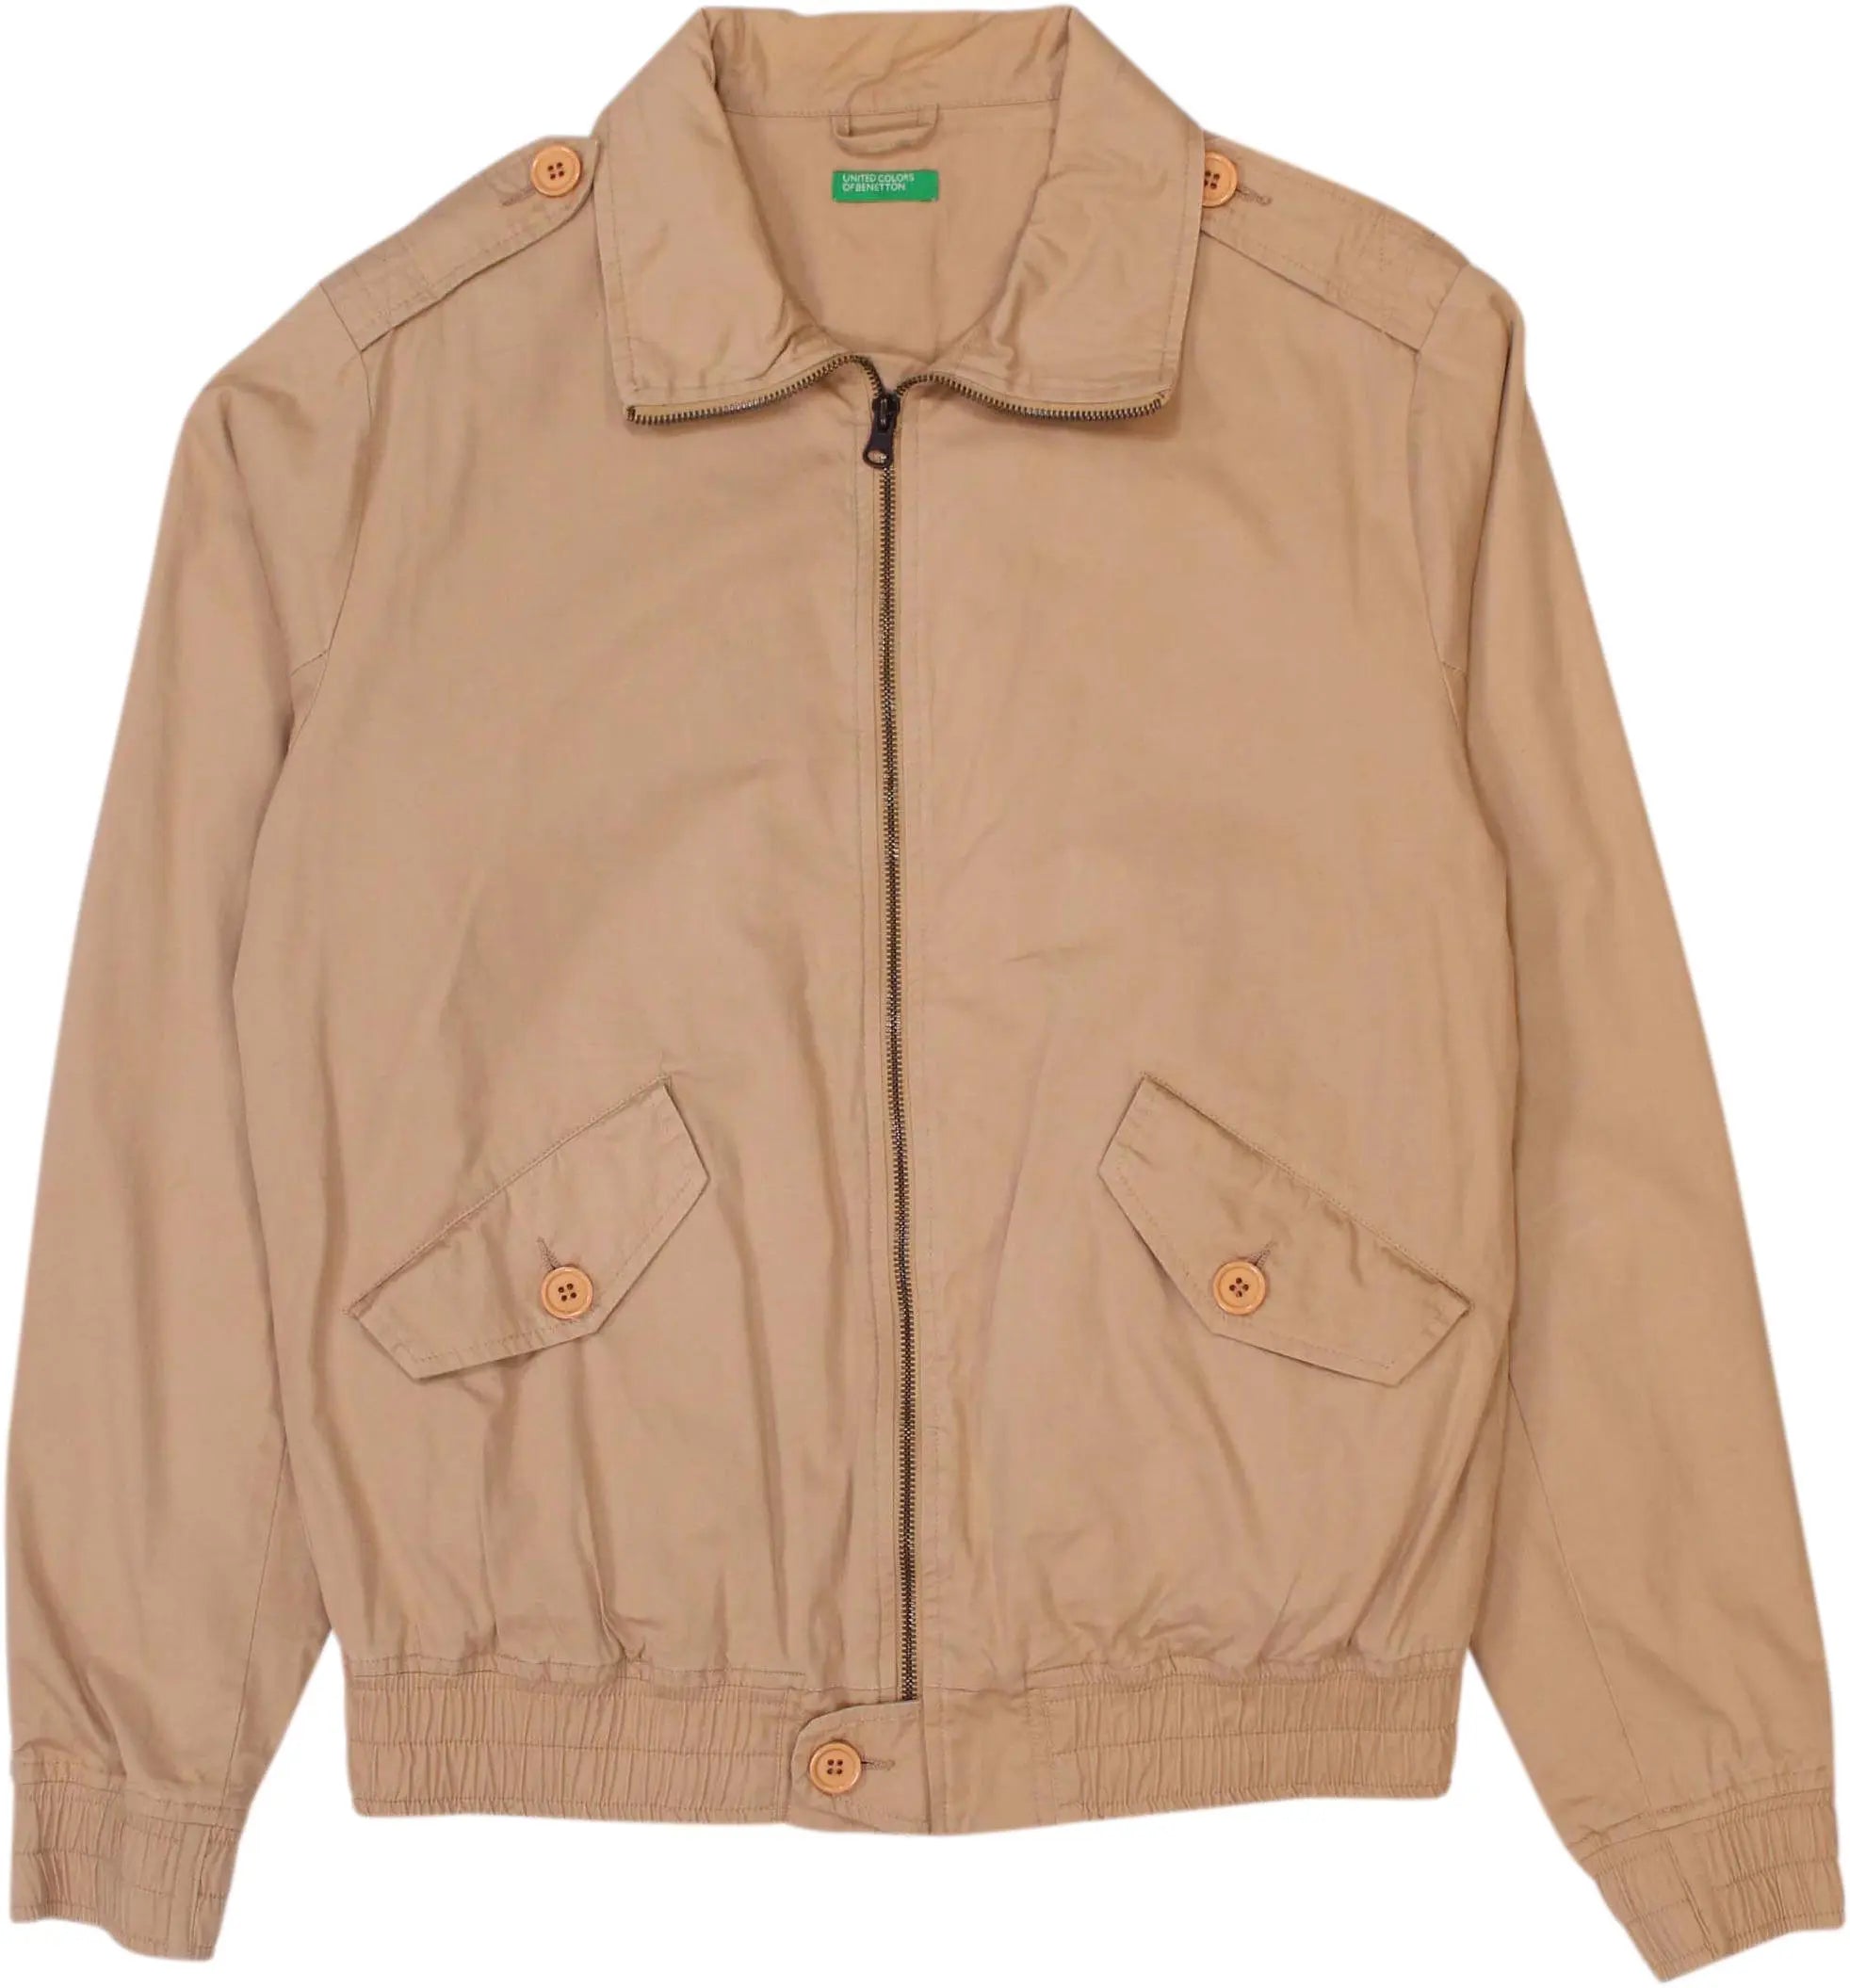 United Colors of Benetton - Cotton Coat by United Colors of Benetton- ThriftTale.com - Vintage and second handclothing